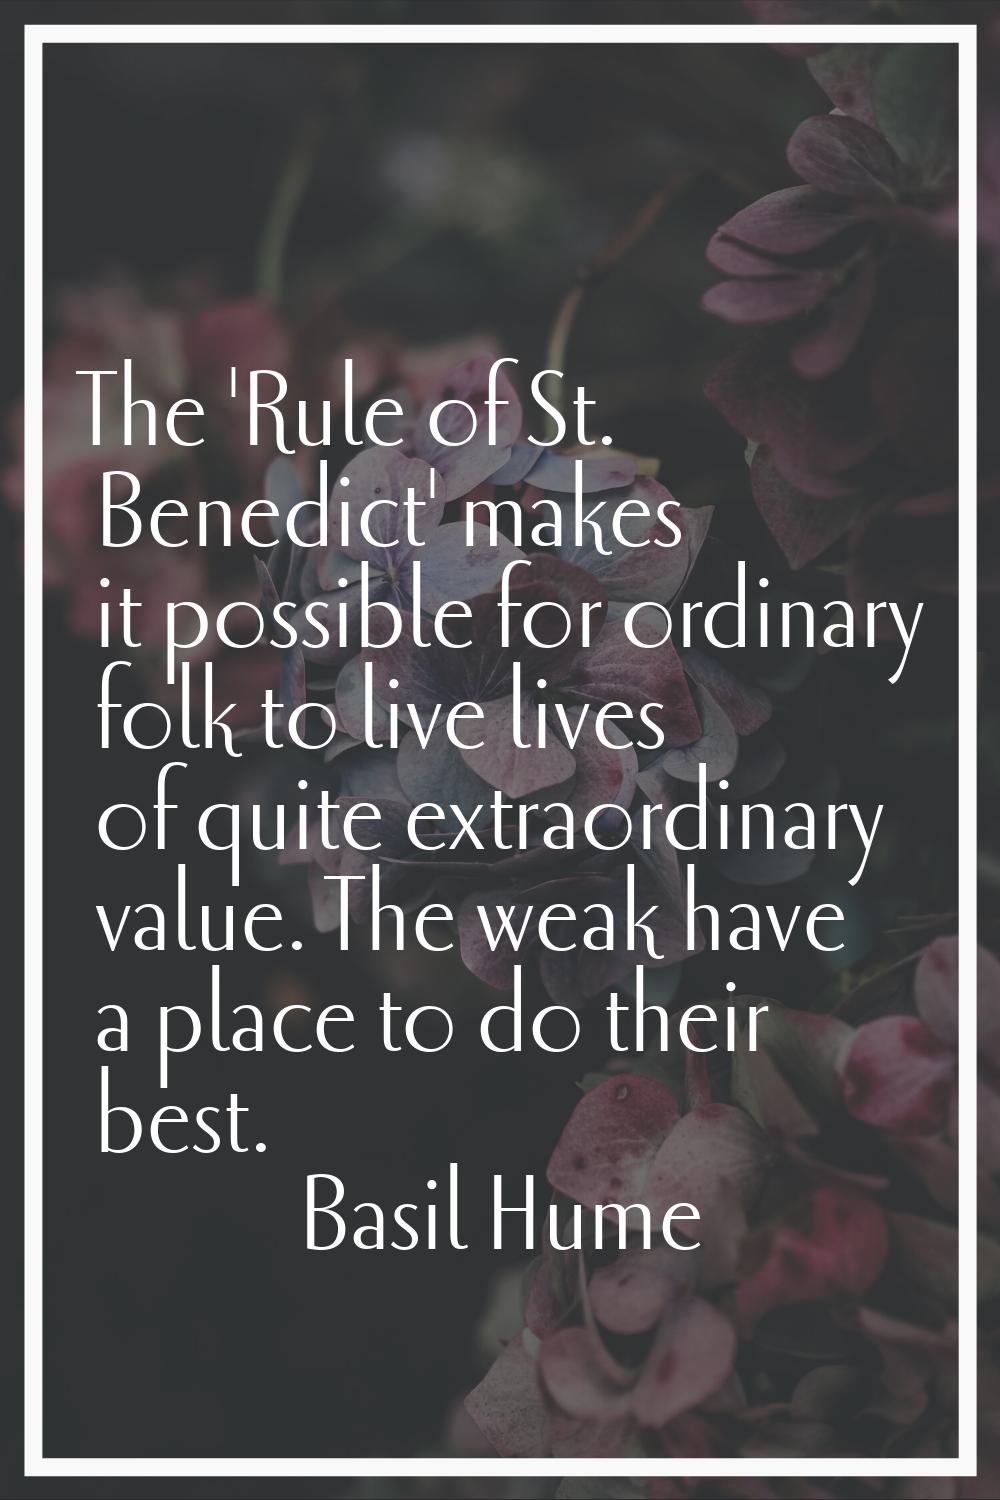 The 'Rule of St. Benedict' makes it possible for ordinary folk to live lives of quite extraordinary